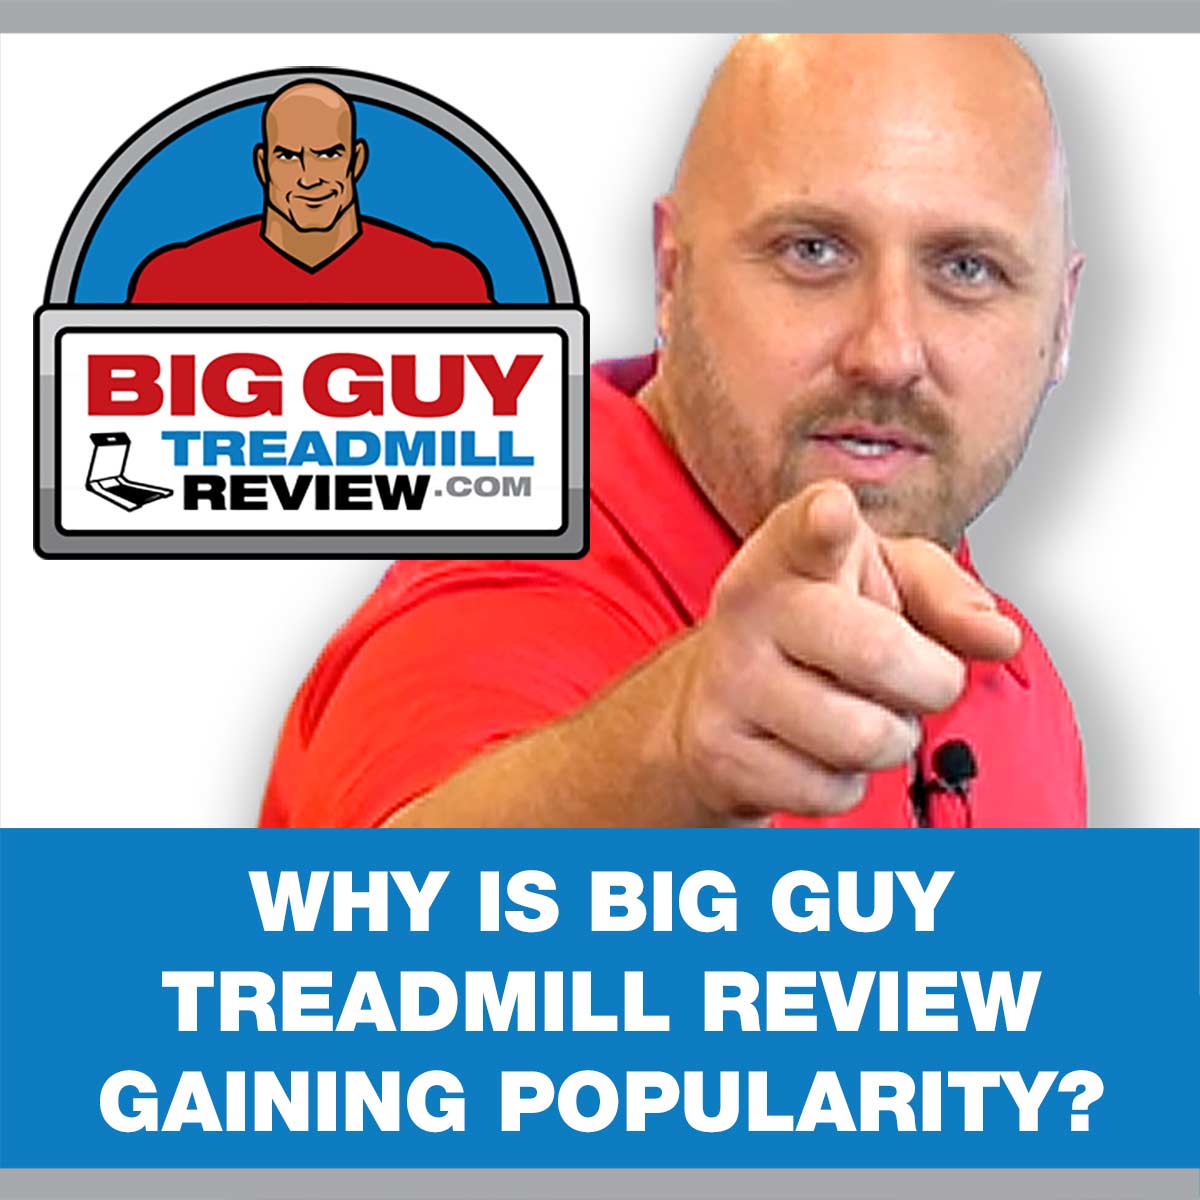 Why is Big Guy Treadmill review gaining popularity?